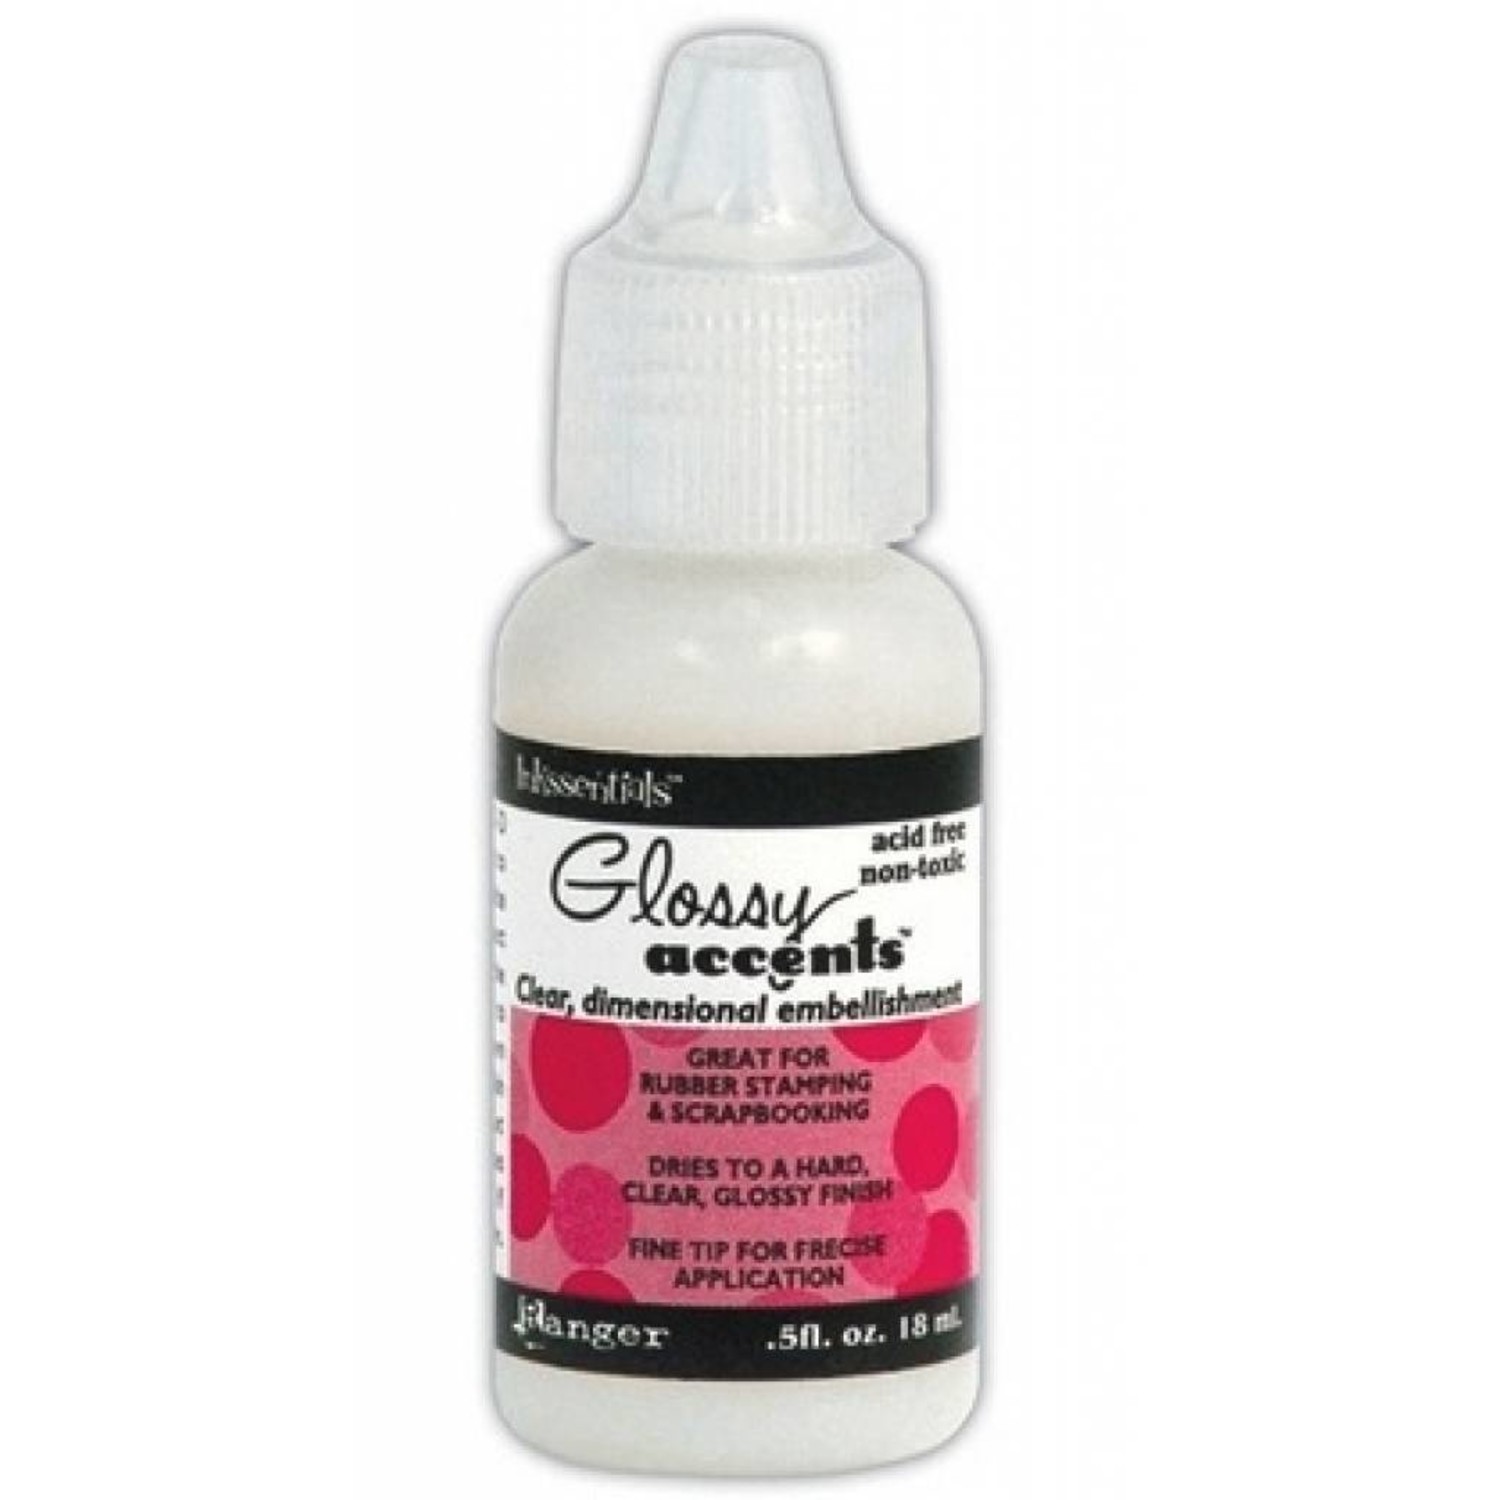 Glossy Accents 59 ml.